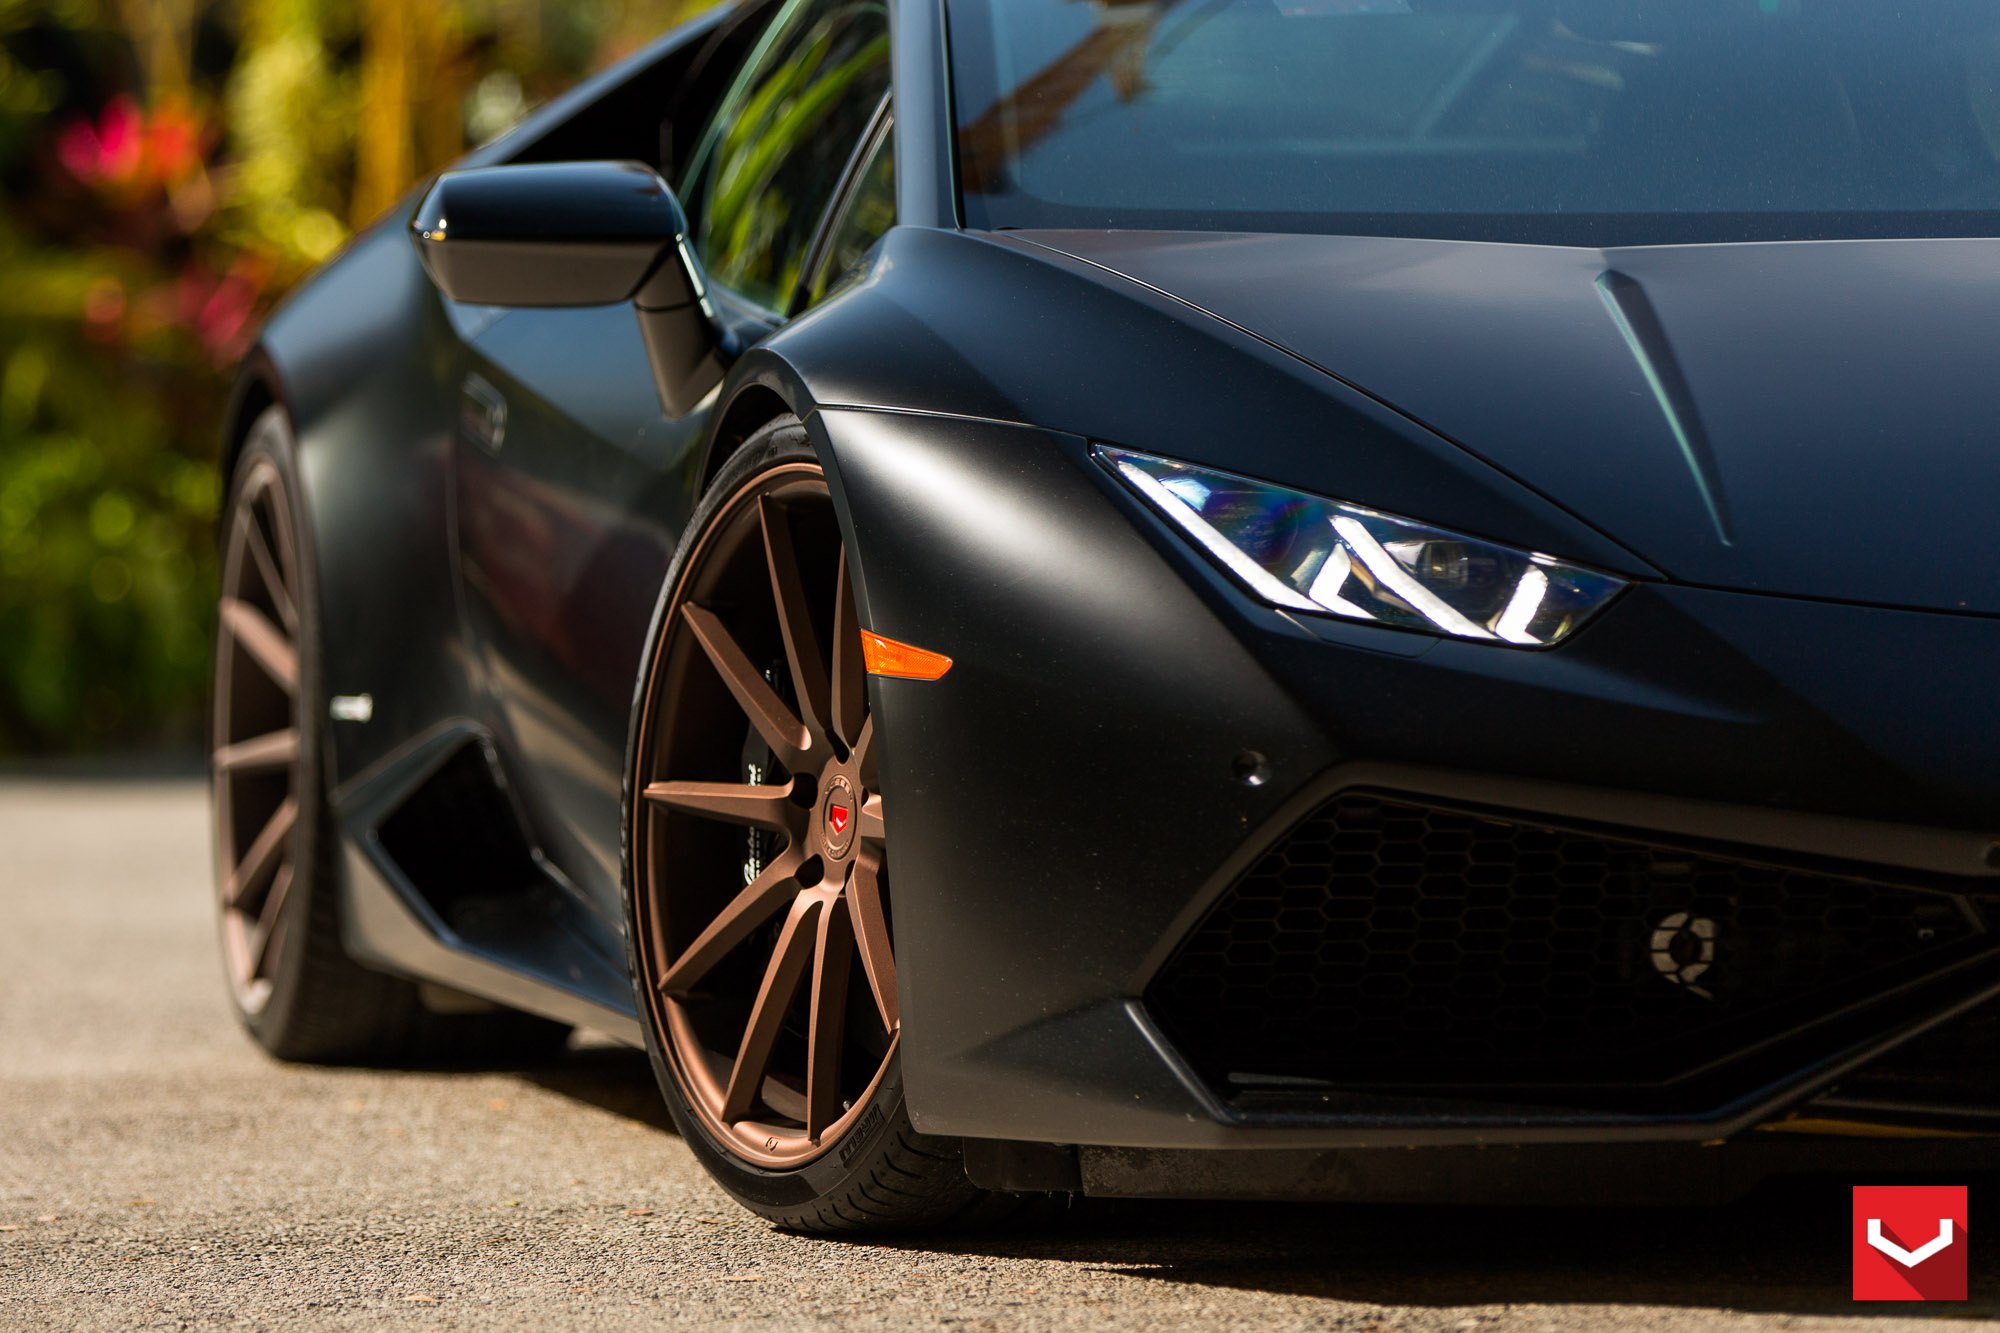 Supercar for a Luxury Night Out: Black Huracan on Bronze ...